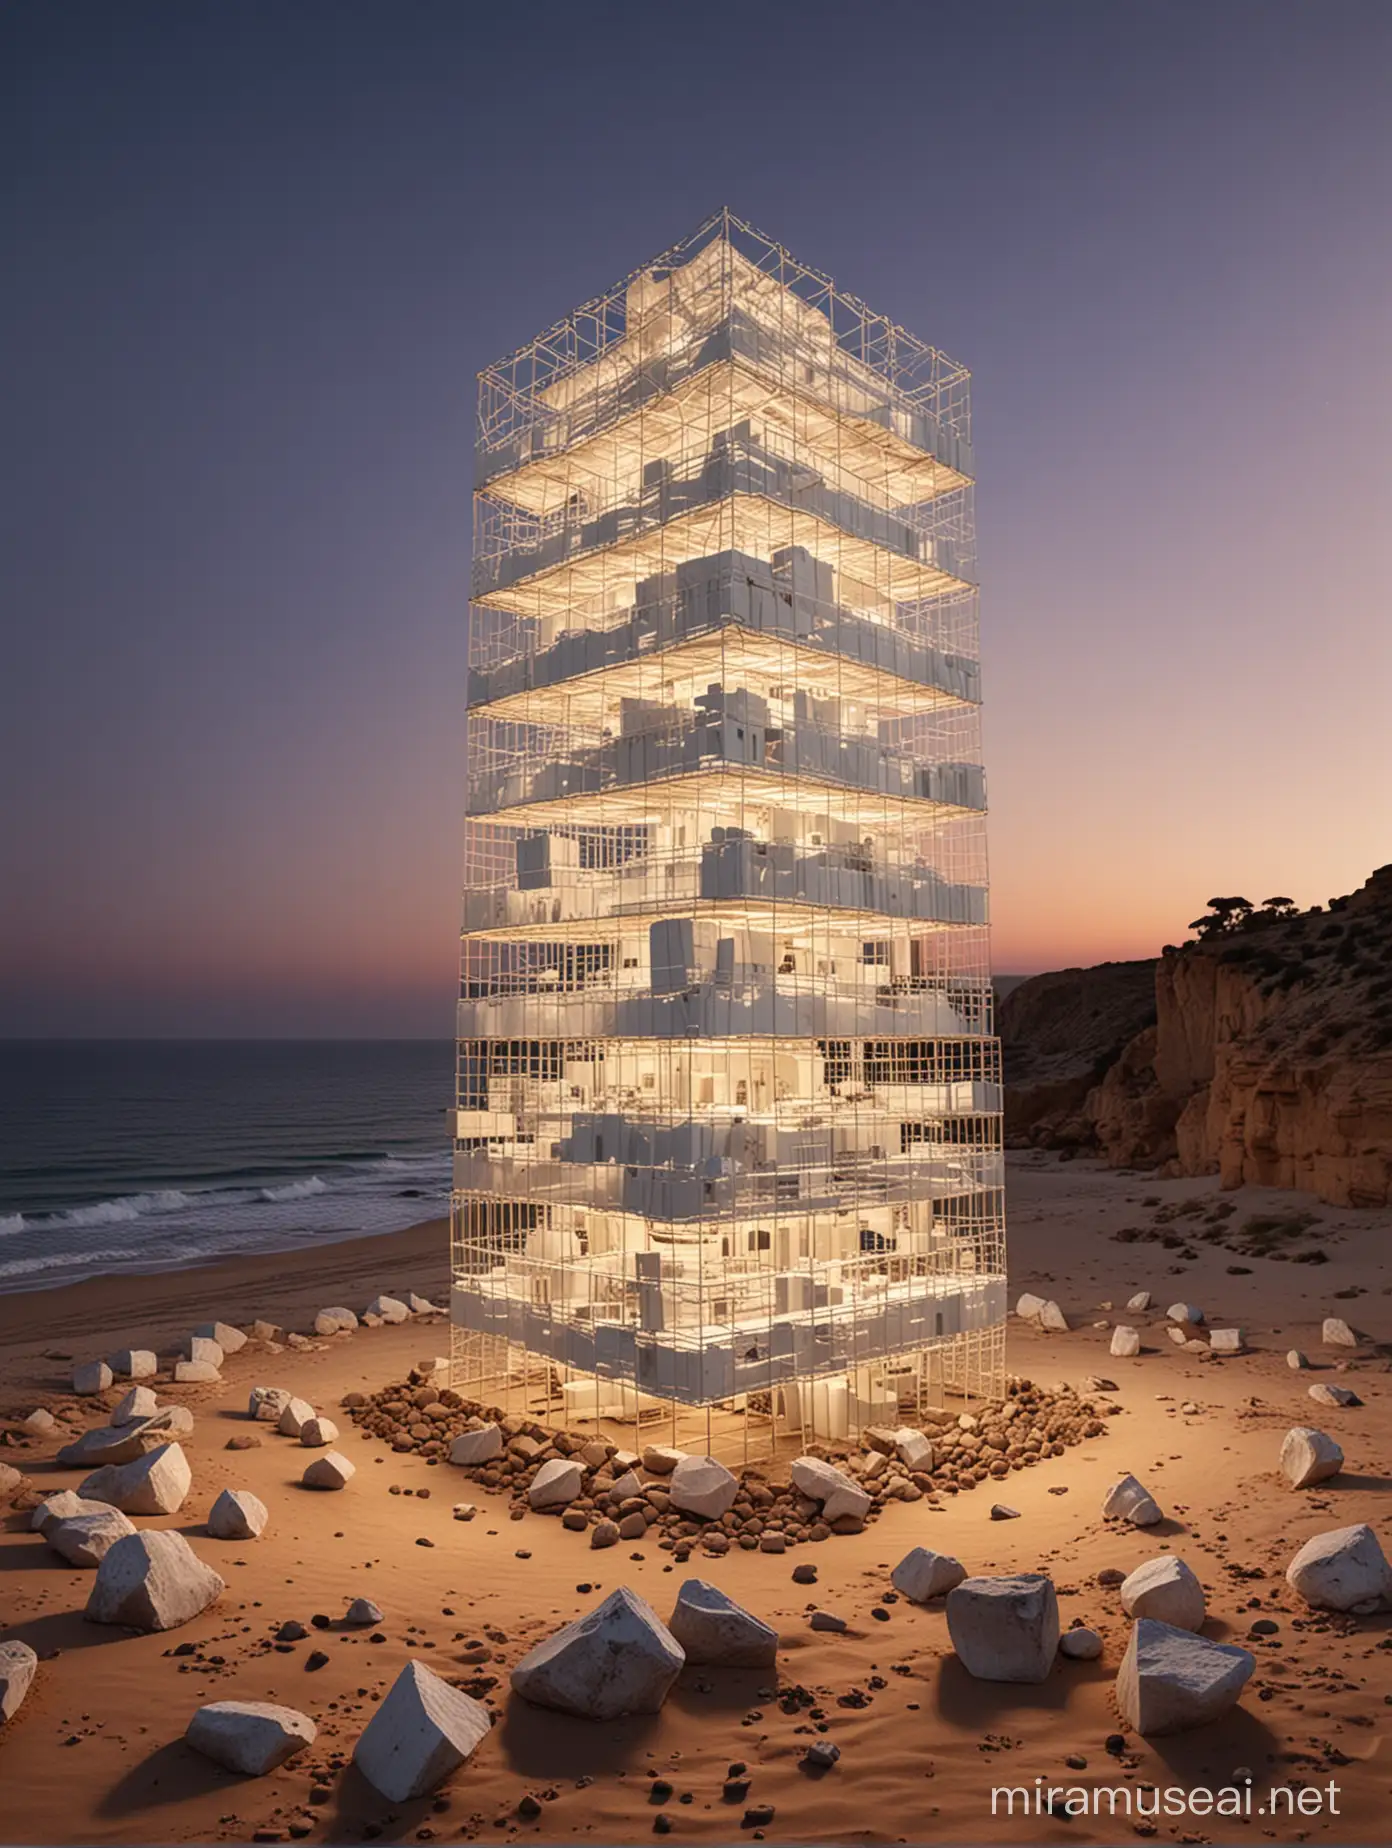 Create an eye-catching and realistic dynamic image of a white wireframe multi-storey building composed of empty white steel cubes without walls, stacked in many different layers. This structure stands as a three-storey white tower emerging from the desert of sand and rocks facing the sea. The twilight light accentuates the contours of the structure, creating a fascinating contrast between its geometric shape and the surrounding natural environment. The atmosphere of the sea is pleasant and mysterious at the same time, with warm shades dominating the landscape. Add elements of mystery, such as twilight light filtering through the empty spaces of the cubic structure, suggesting a sense of wonder and uncertainty. This empty building should blend harmoniously with the marine environment, an otherwise wild and desolate landscape. It incorporates realistic and captivating details to create an image that captures the viewer's imagination and transports them to a world of mystery and beauty.